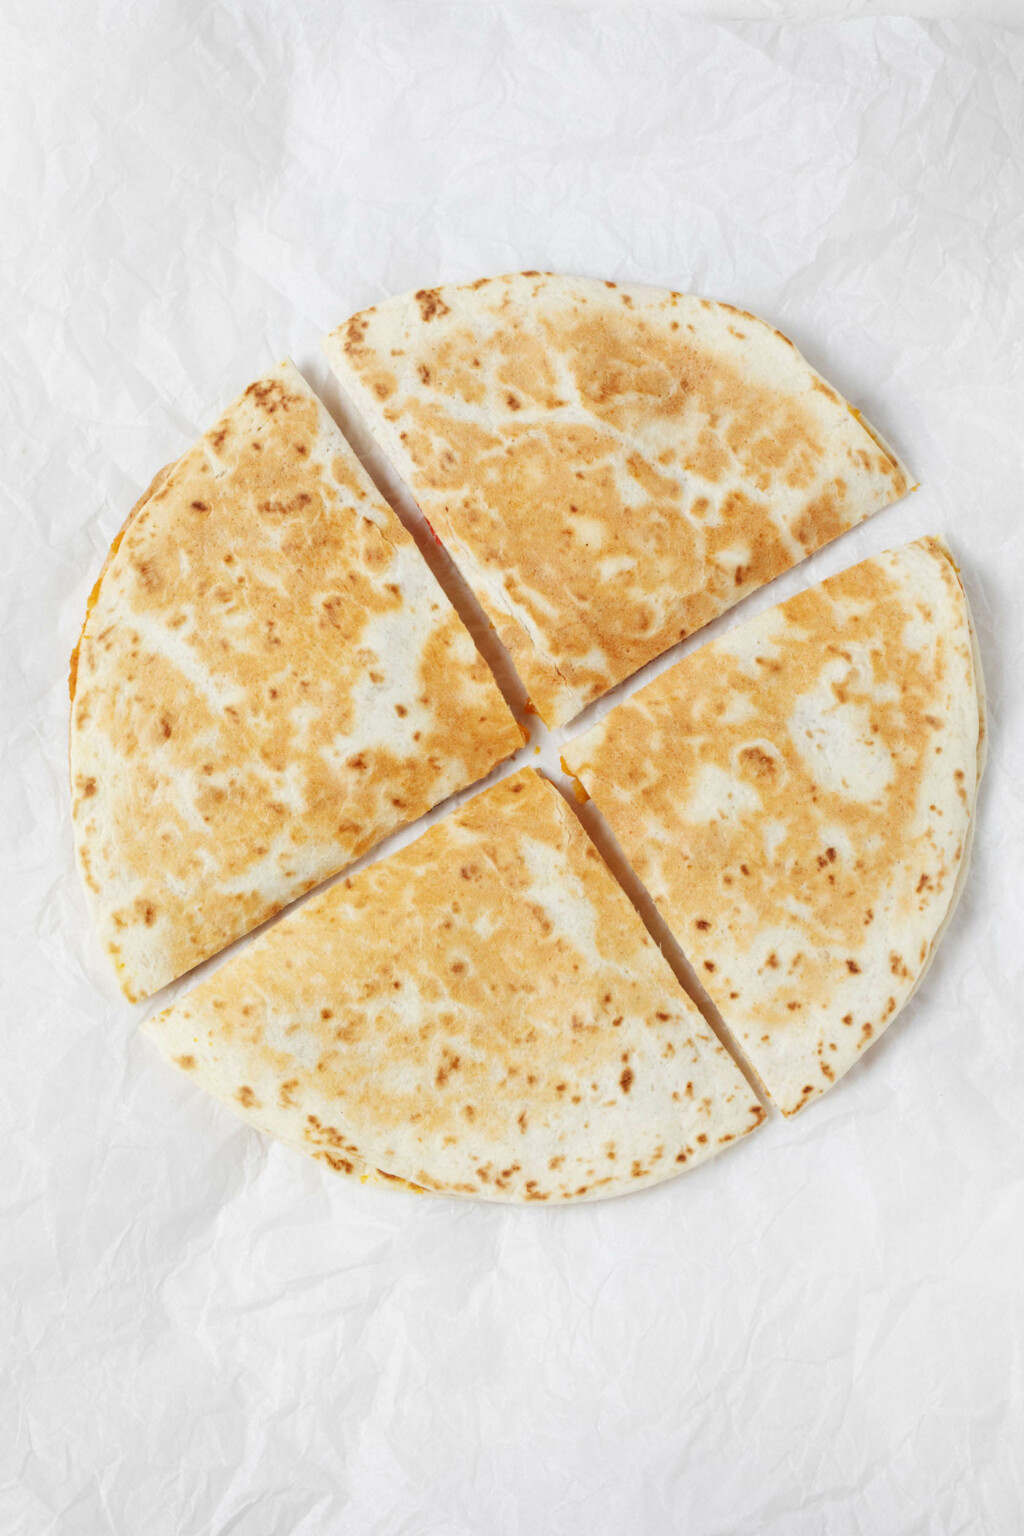 An overhead image of a toasted tortilla "sandwich," with a creamy sweet potato red pepper filling.